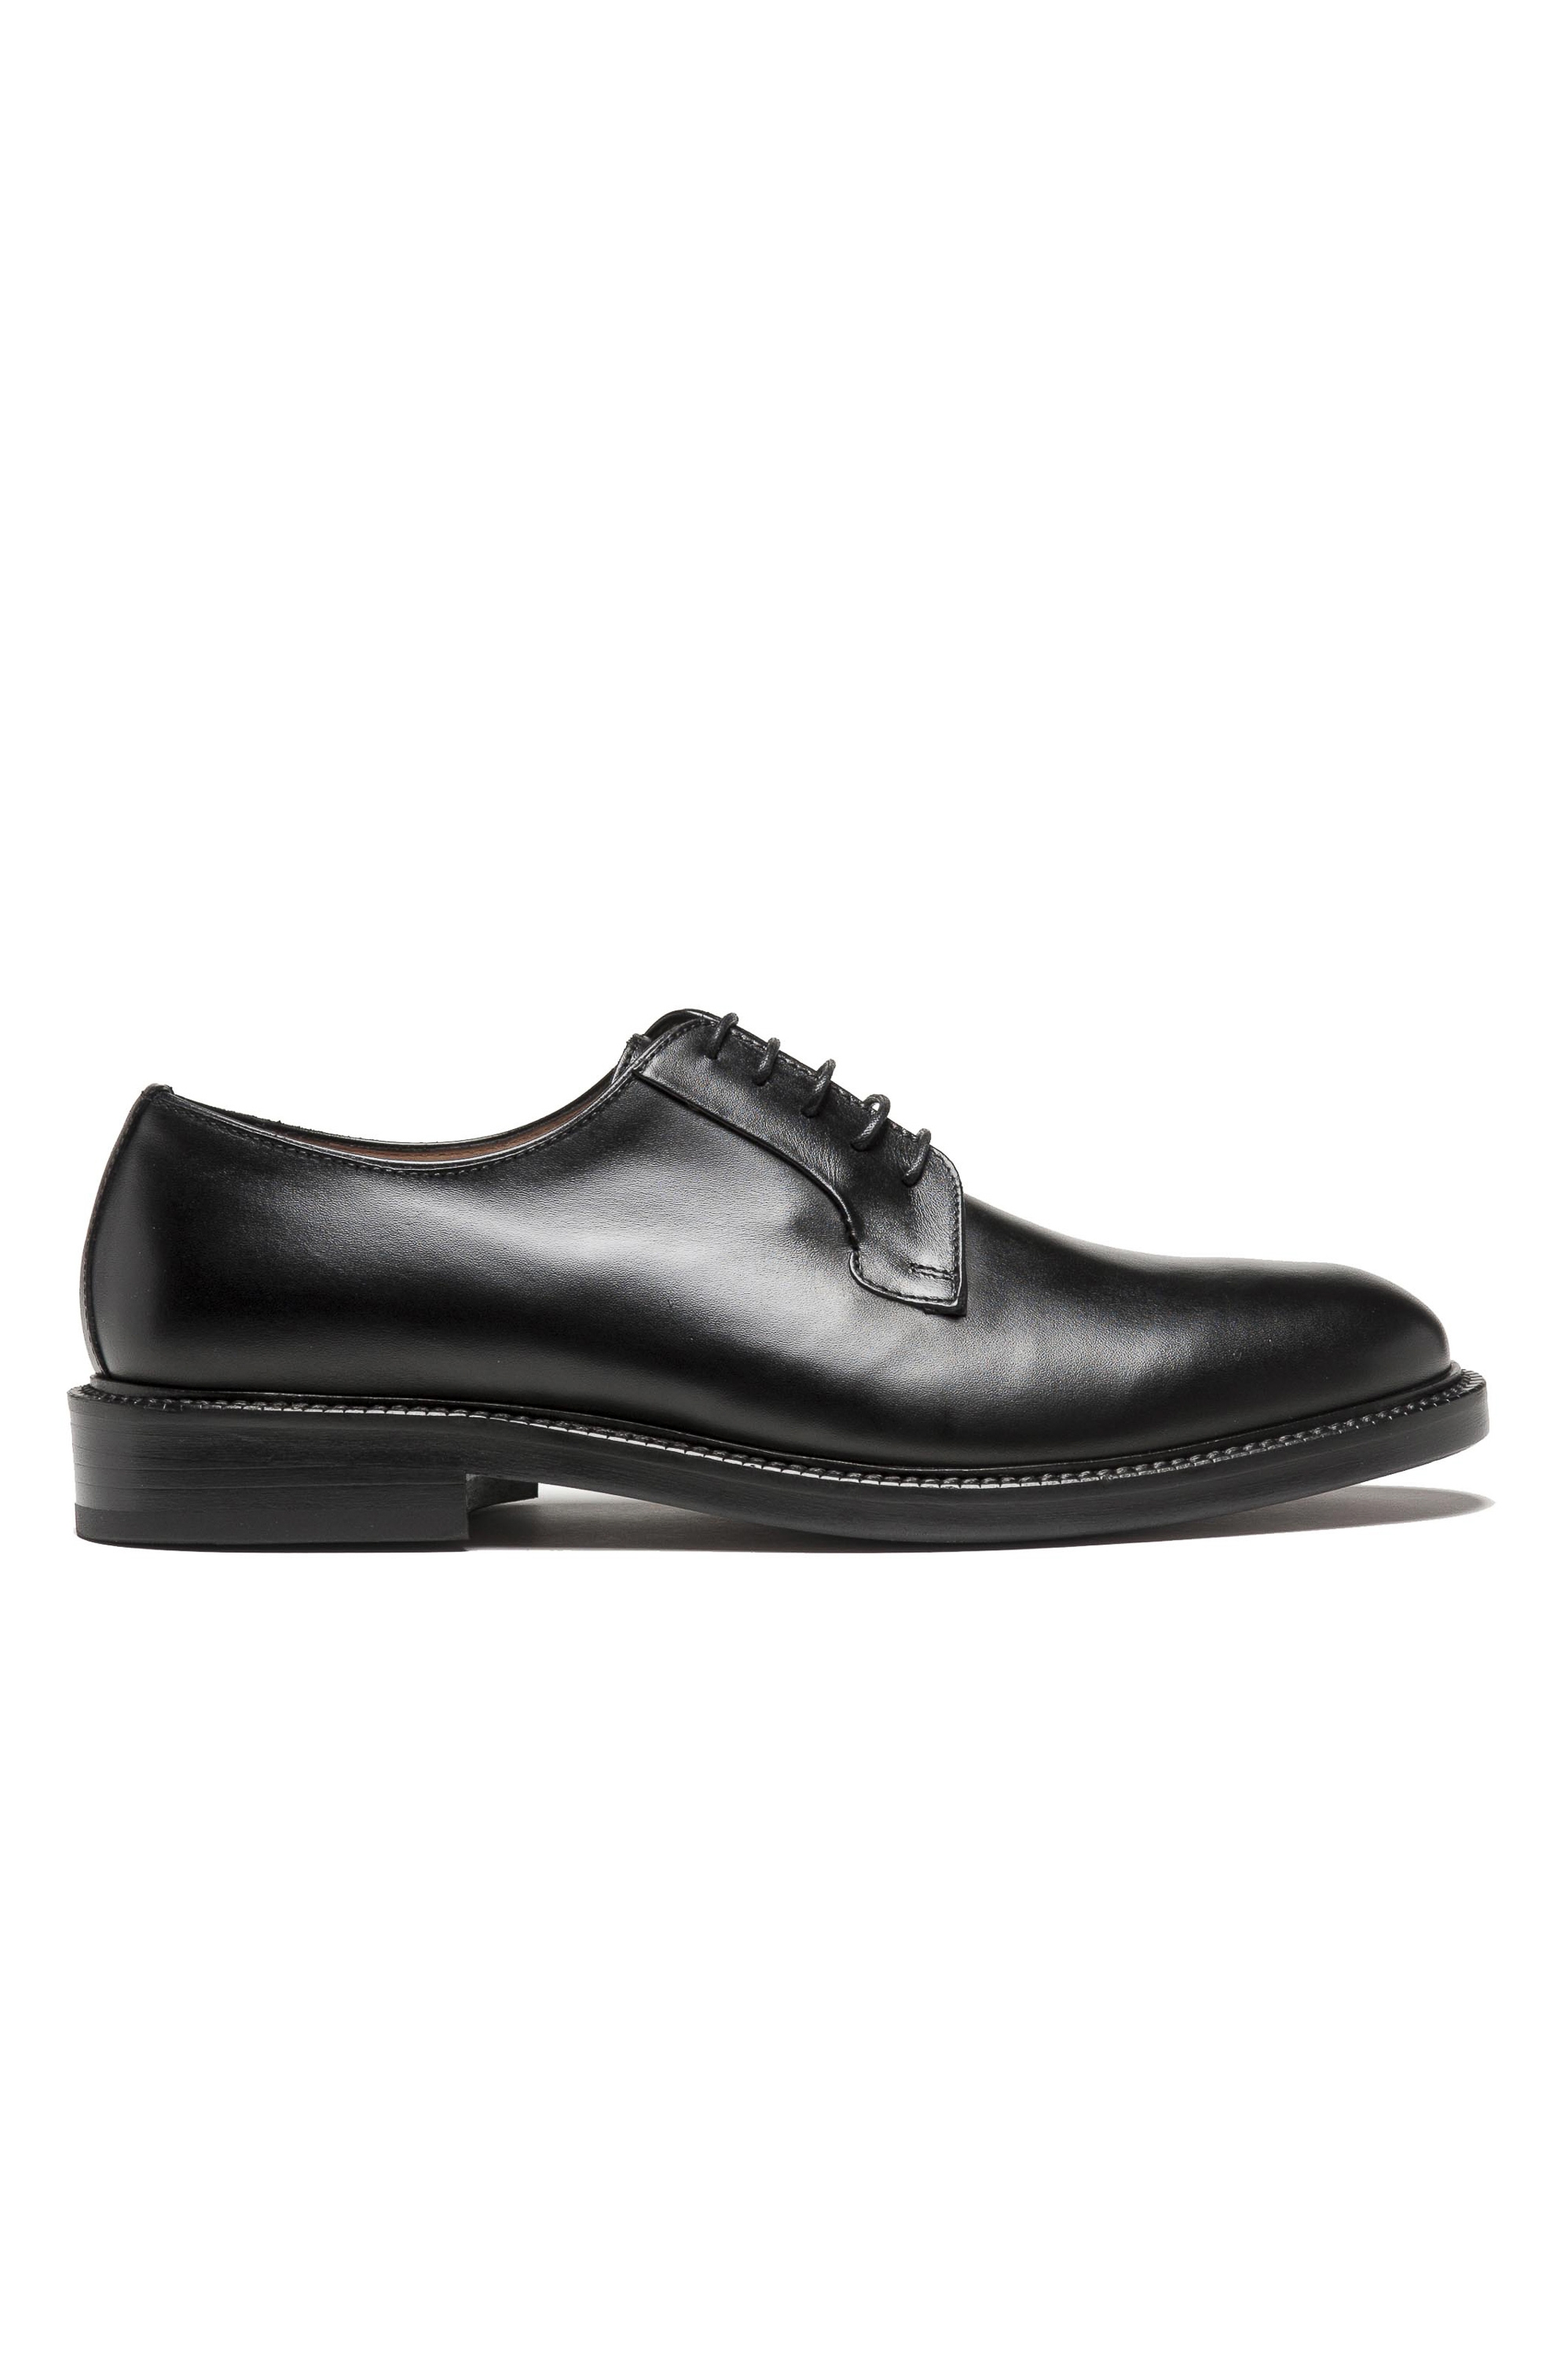 SBU 04686_23AW Black lace-up plain calfskin derbies with leather sole 01